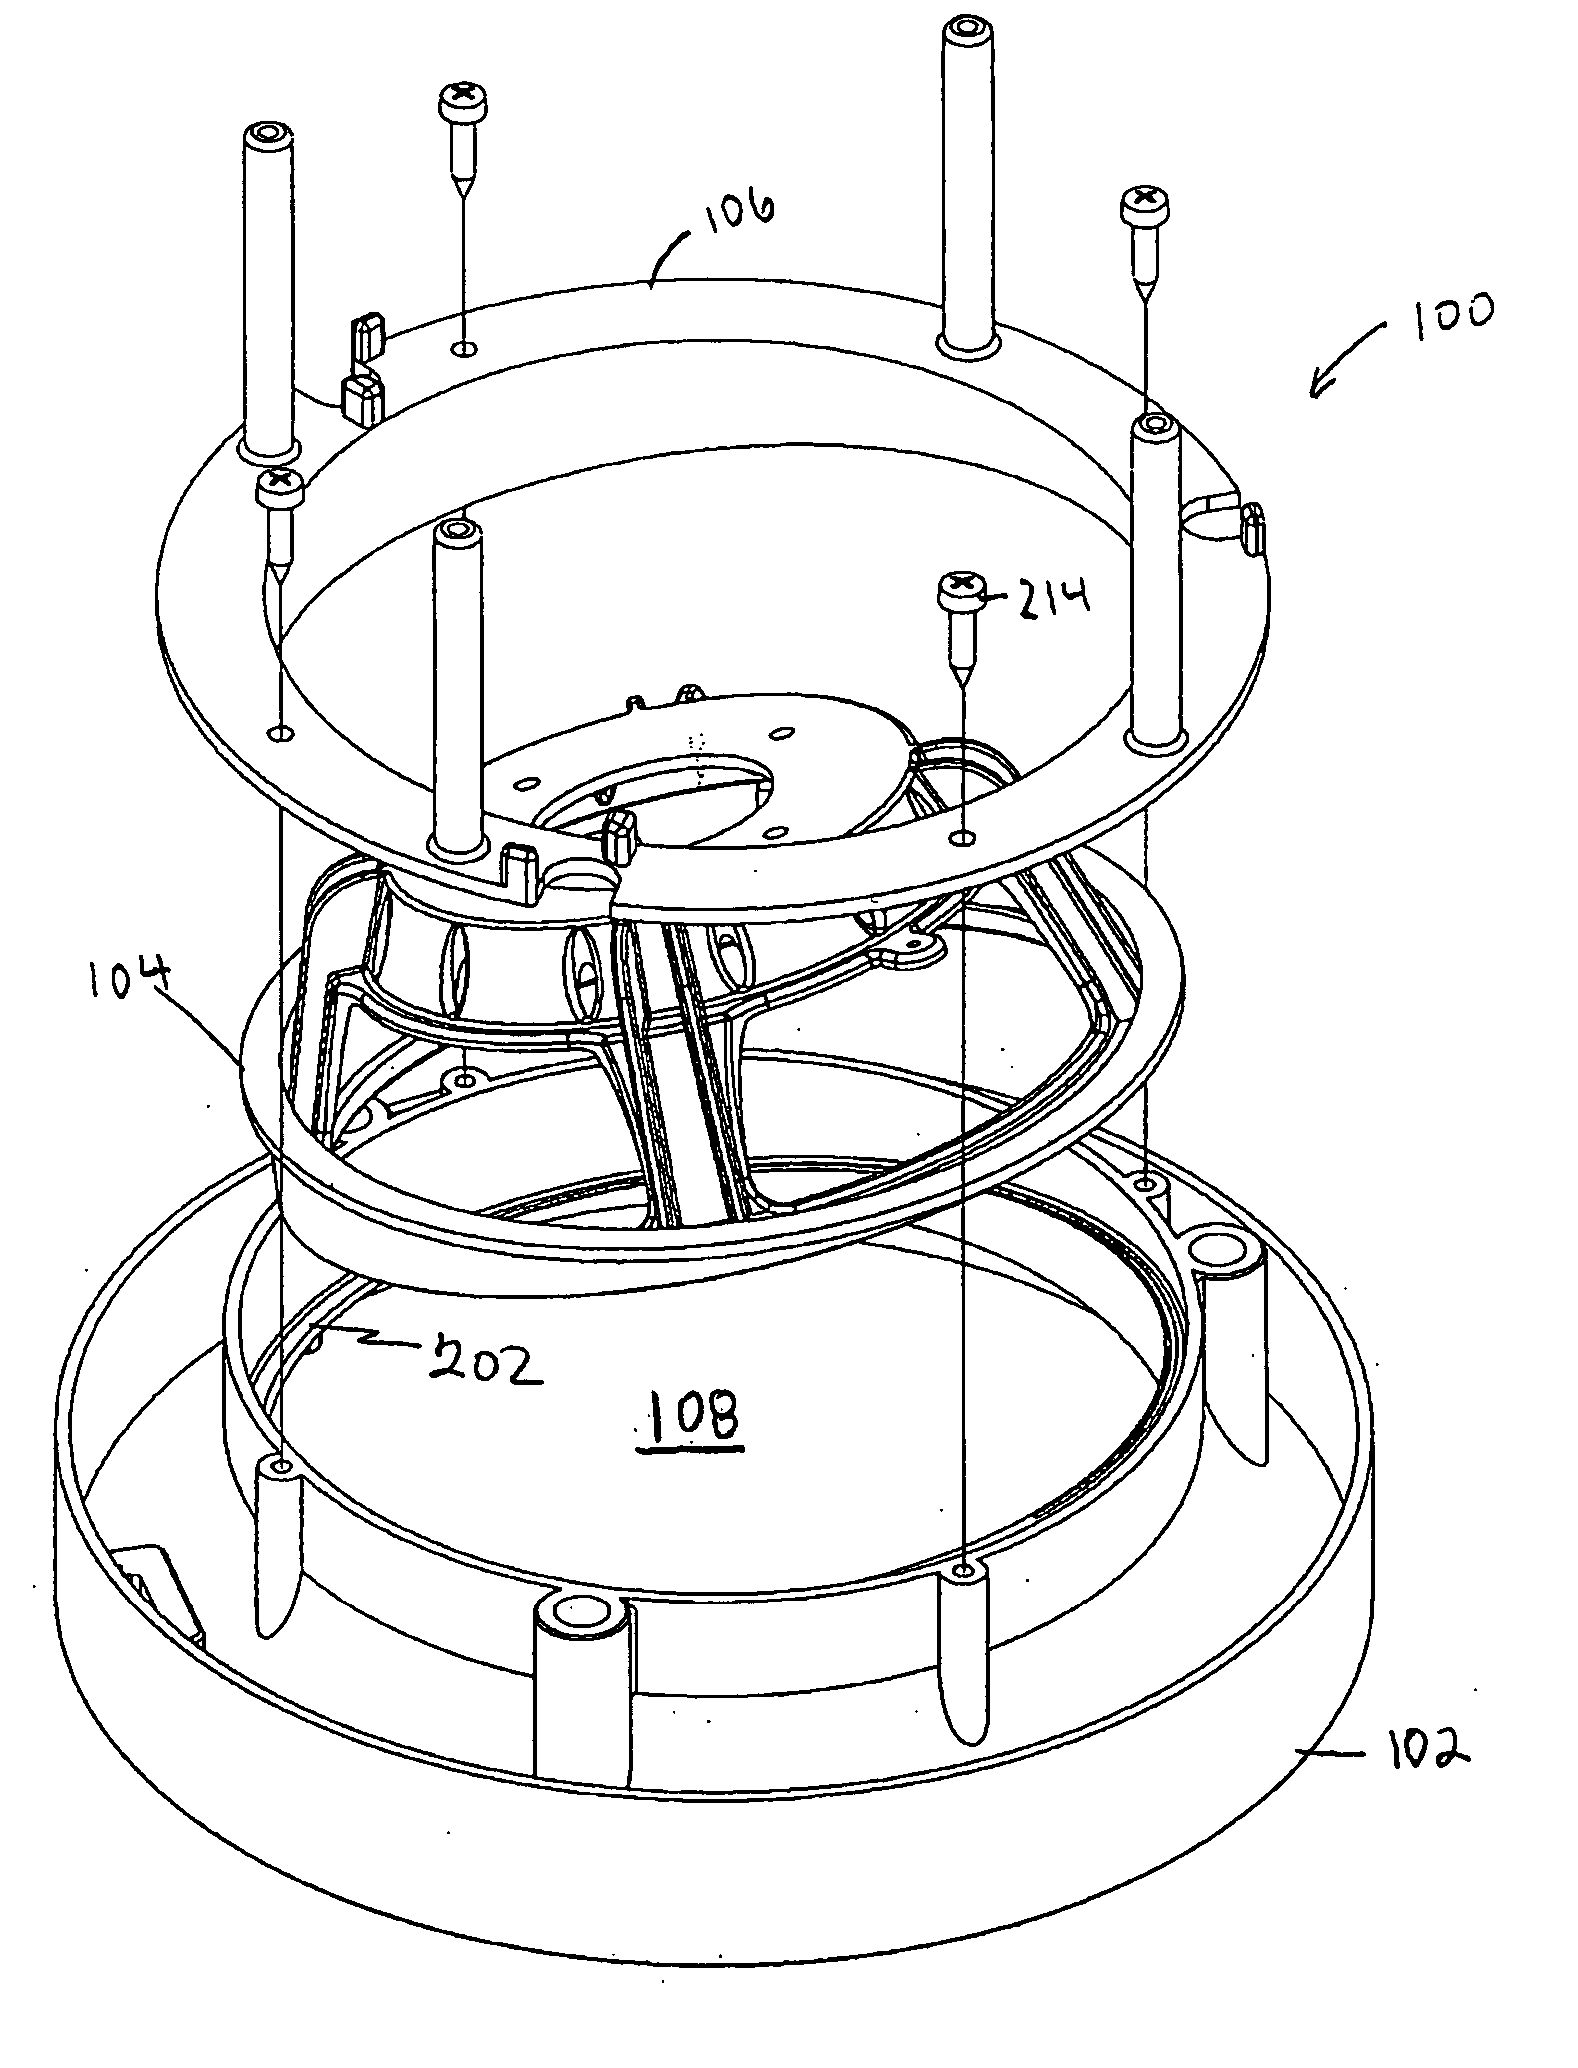 Audio device post extension and angling system